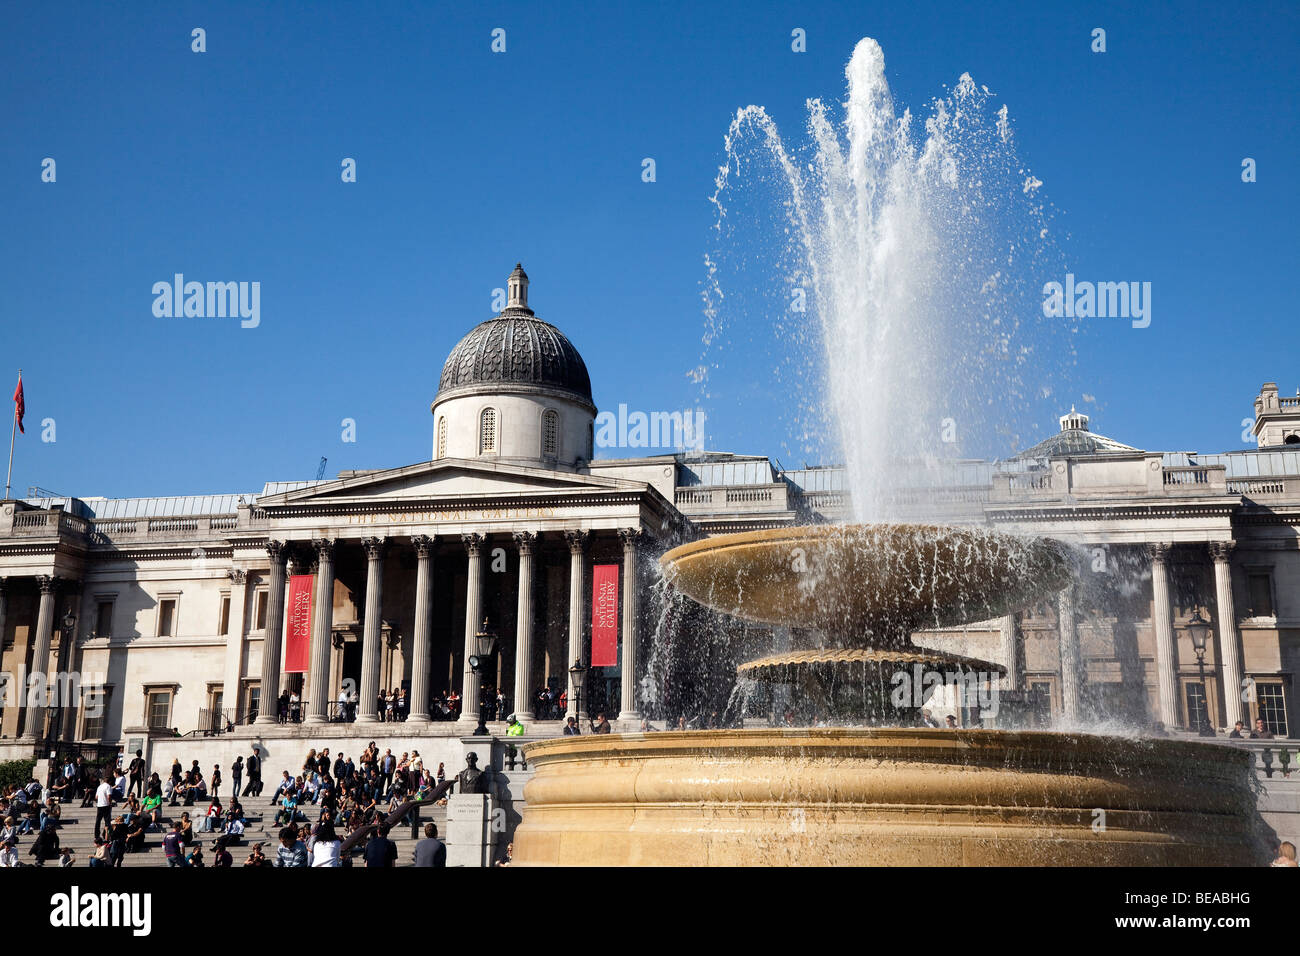 Trafalgar Square fountains and the National Gallery in London Stock Photo